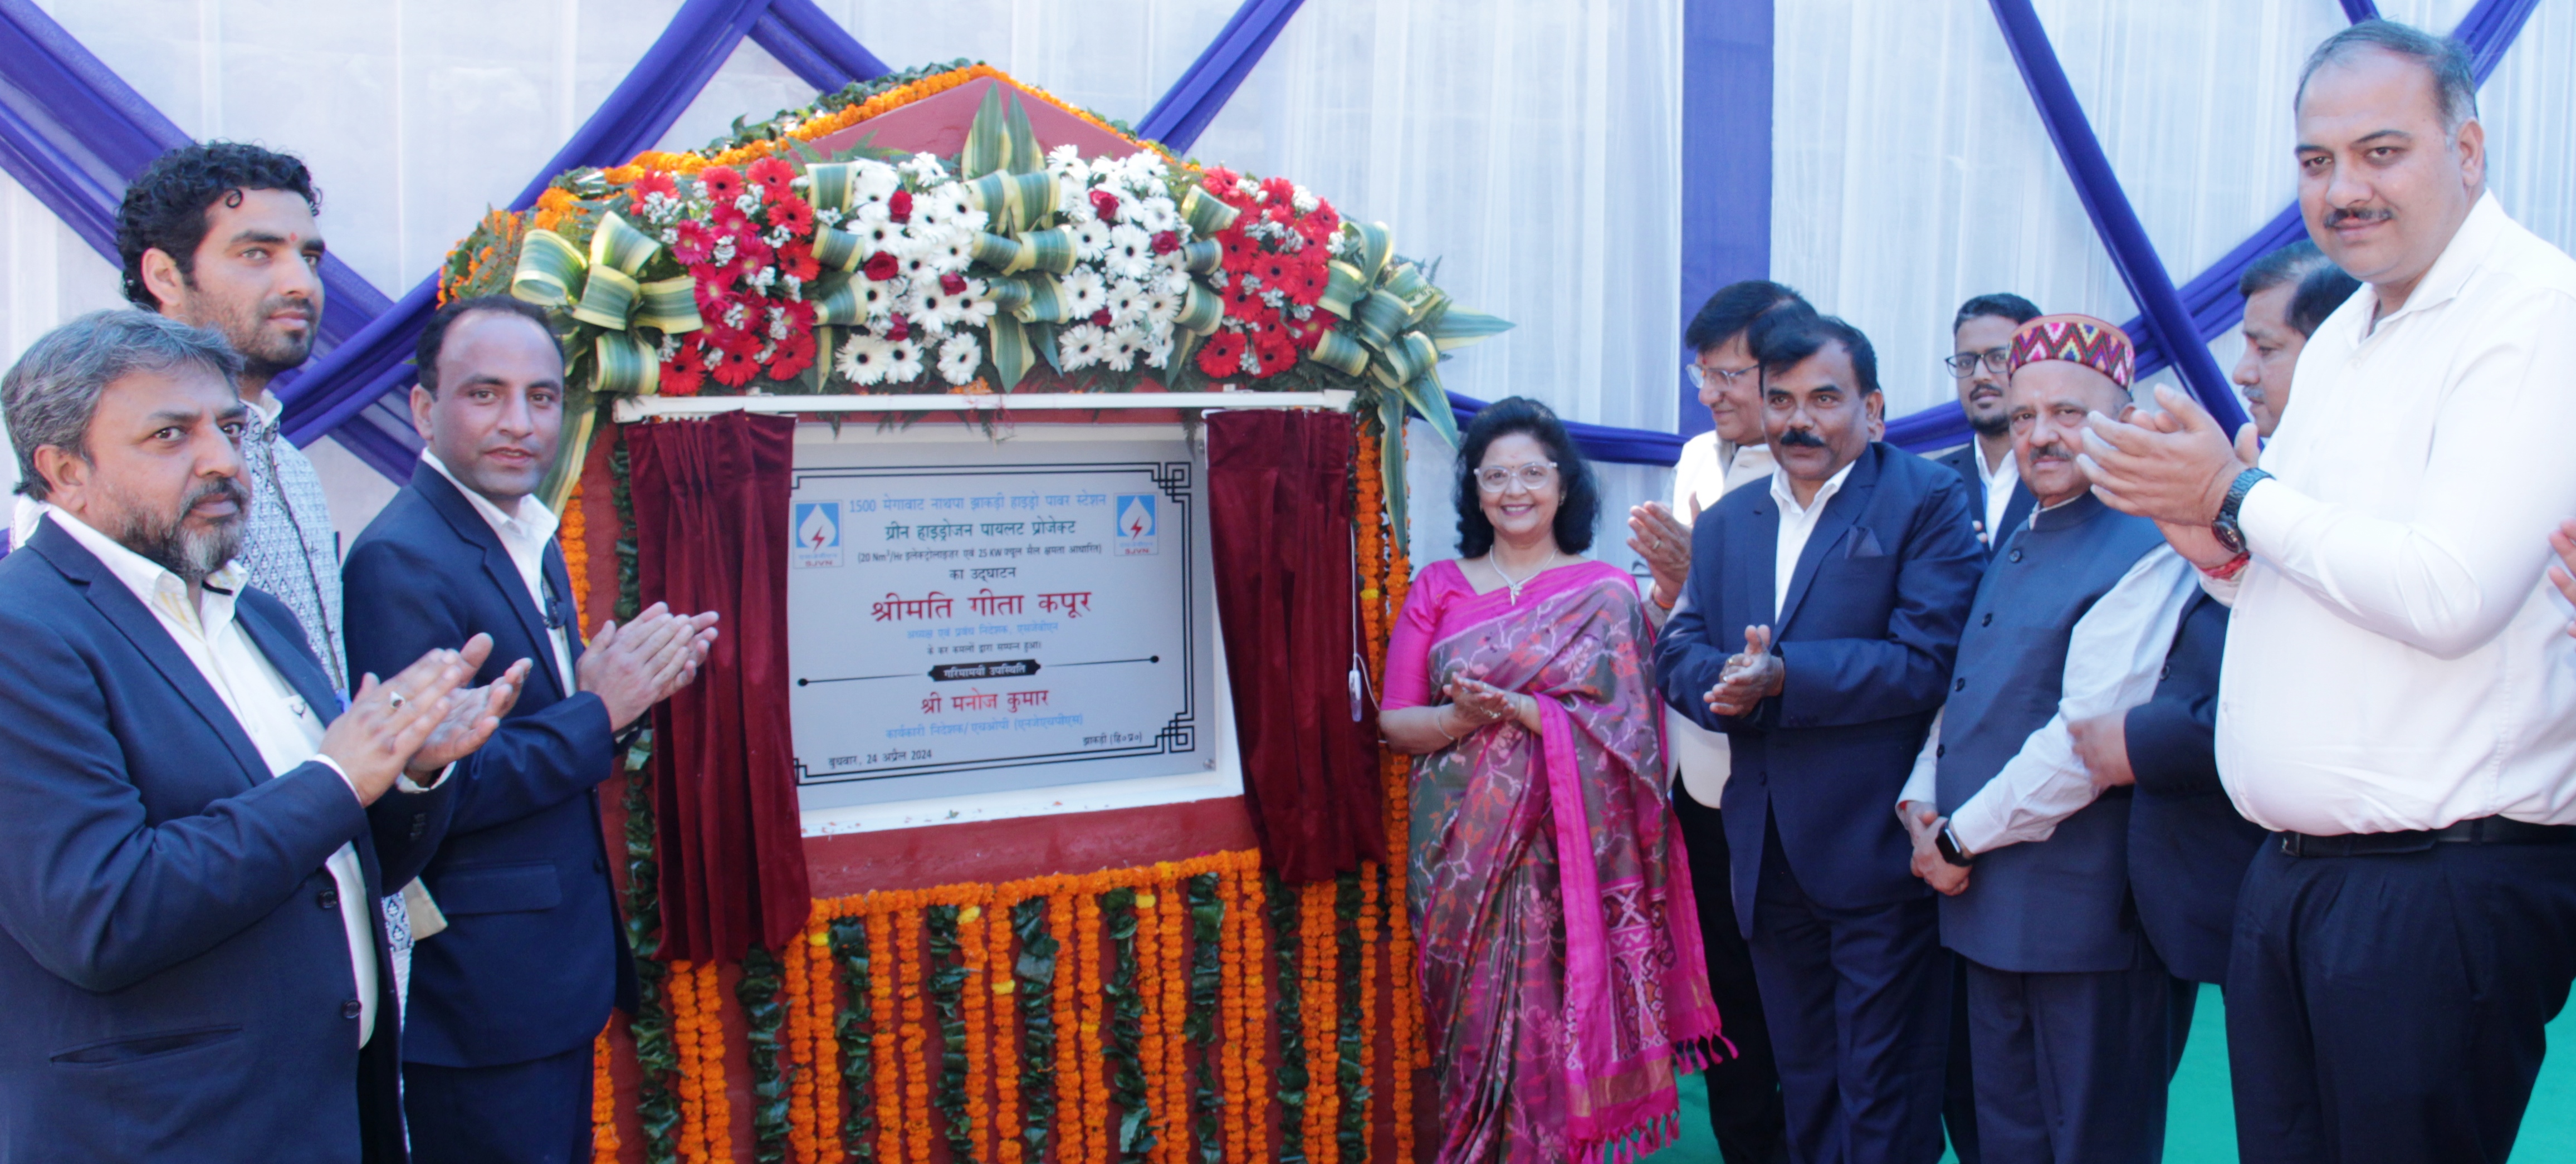 SJVN begins Centralized Operations of 1500 MW Nathpa Jhakri Hydro Power Station and 412 MW Rampur Hydro Power Station